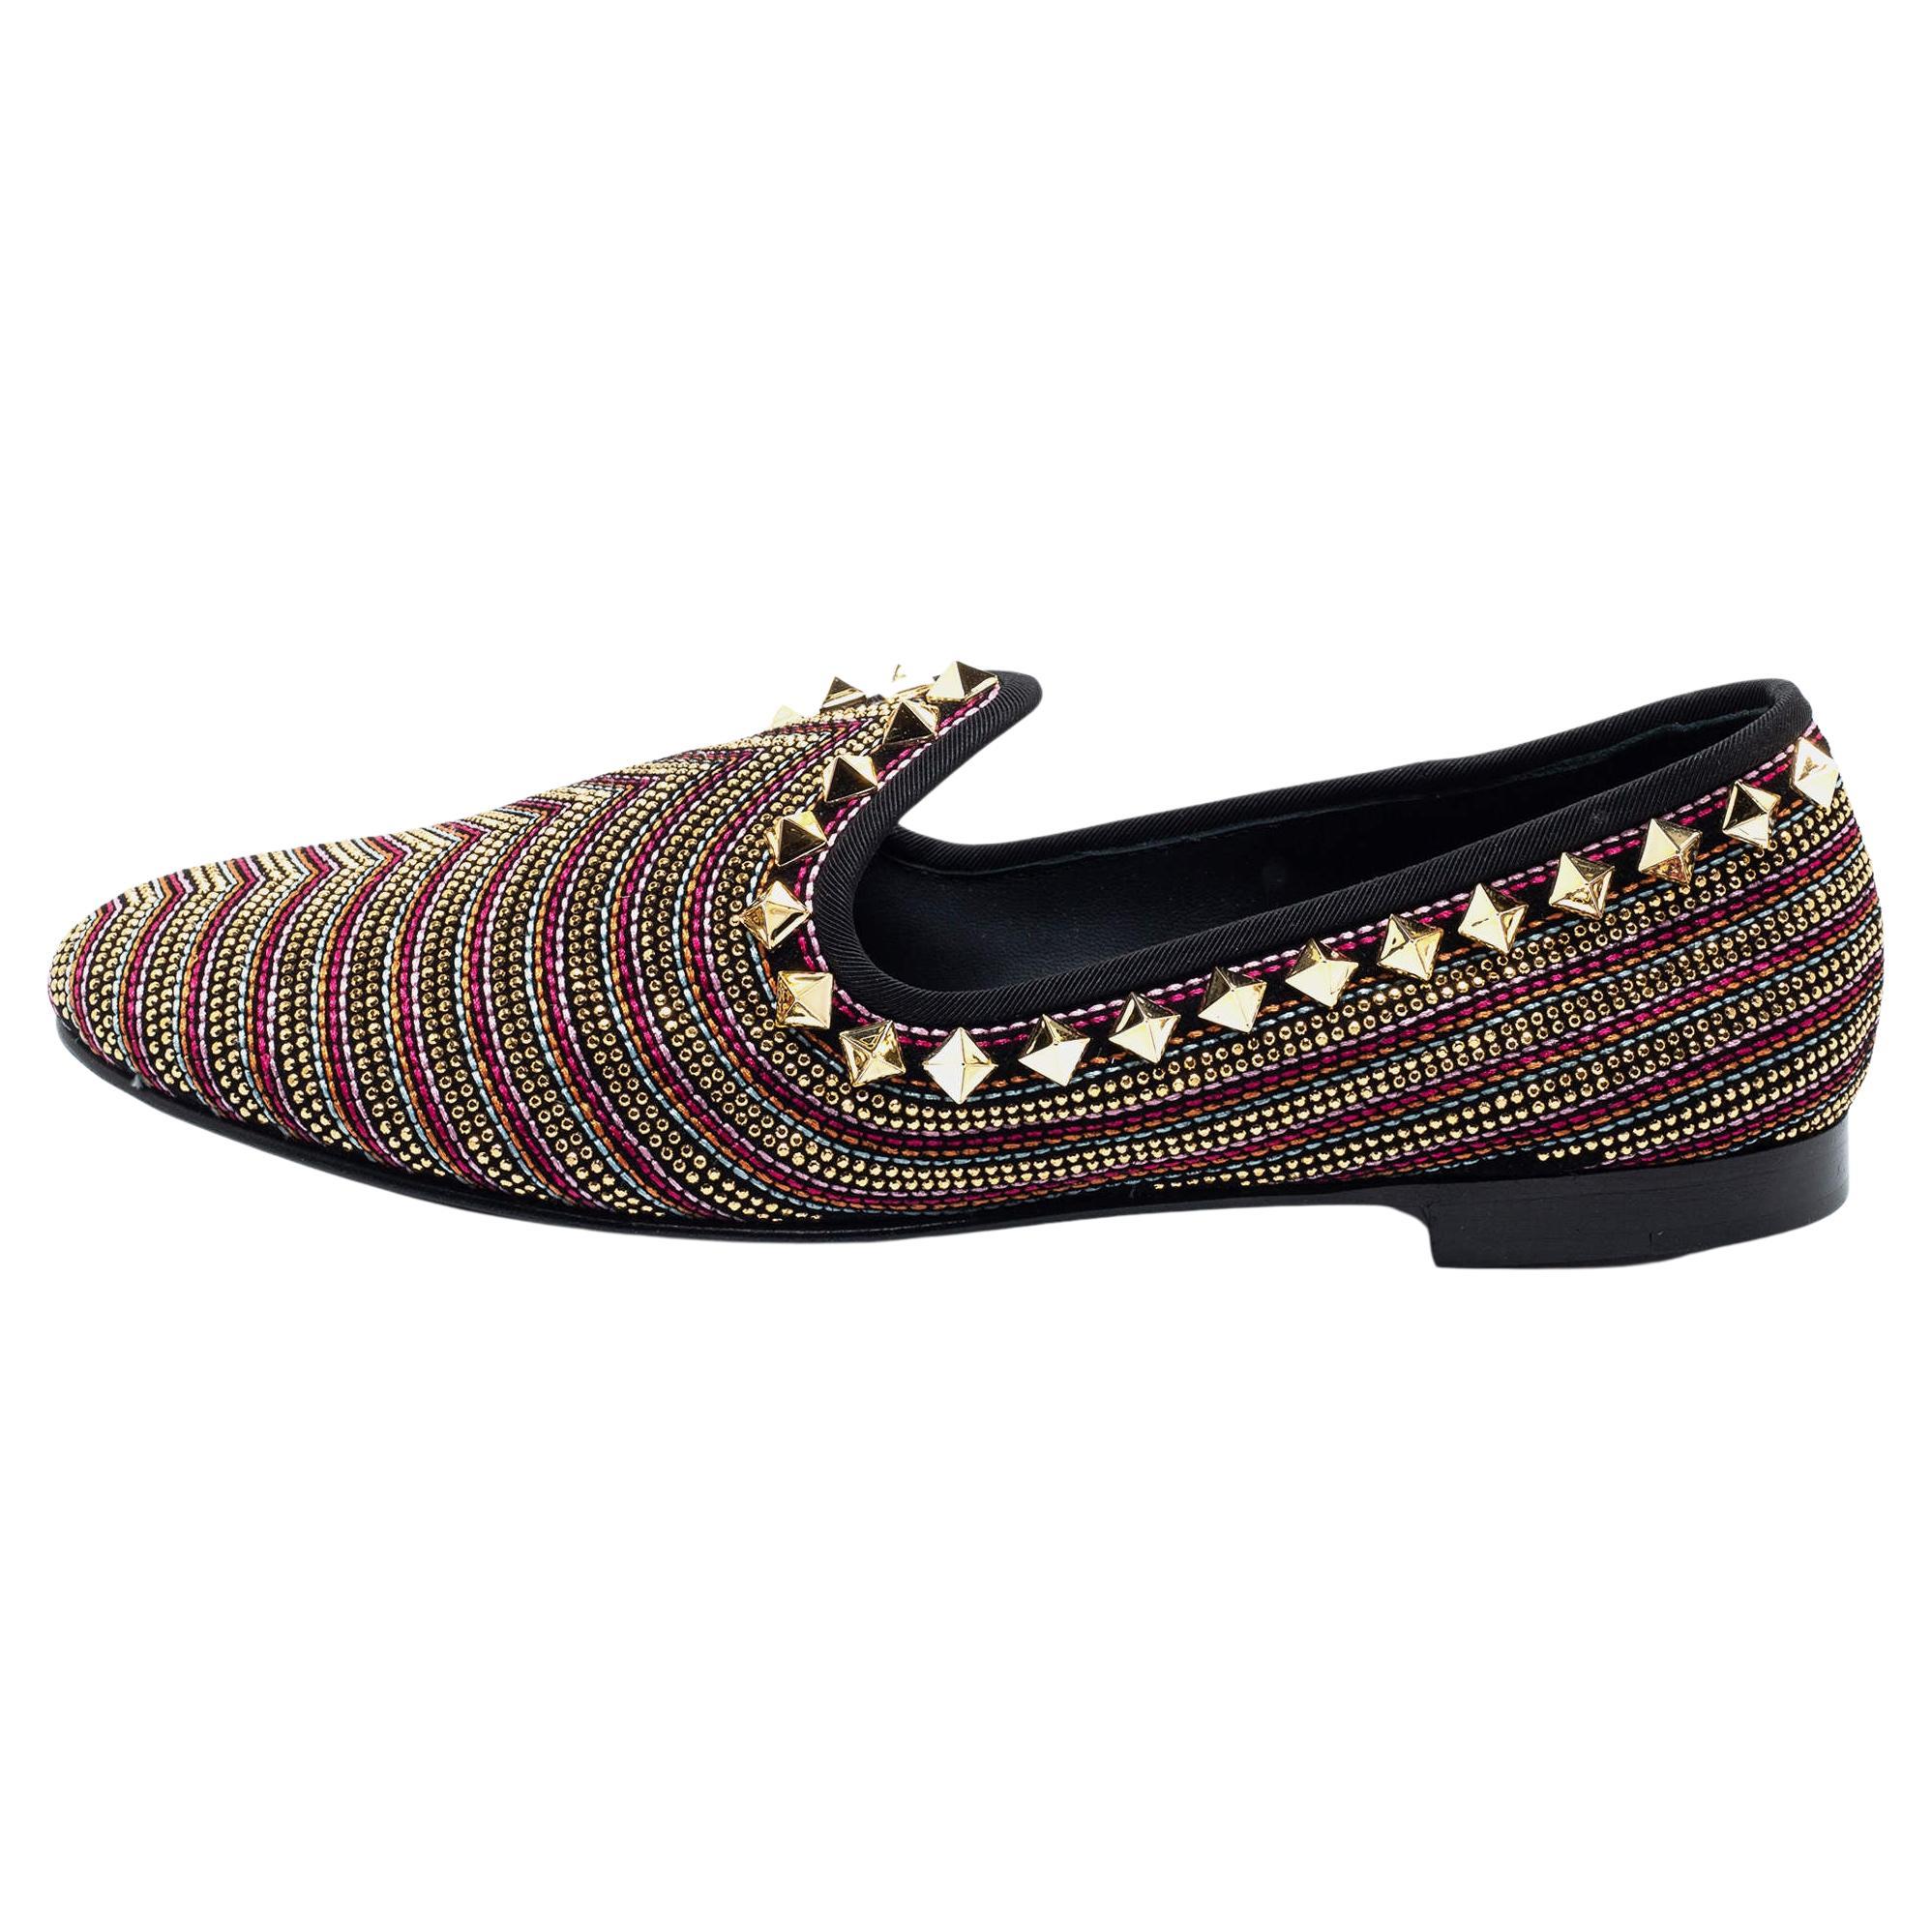 Giuseppe Zanotti Multicolor Embellished Suede Smoking Slippers Size 41 For Sale